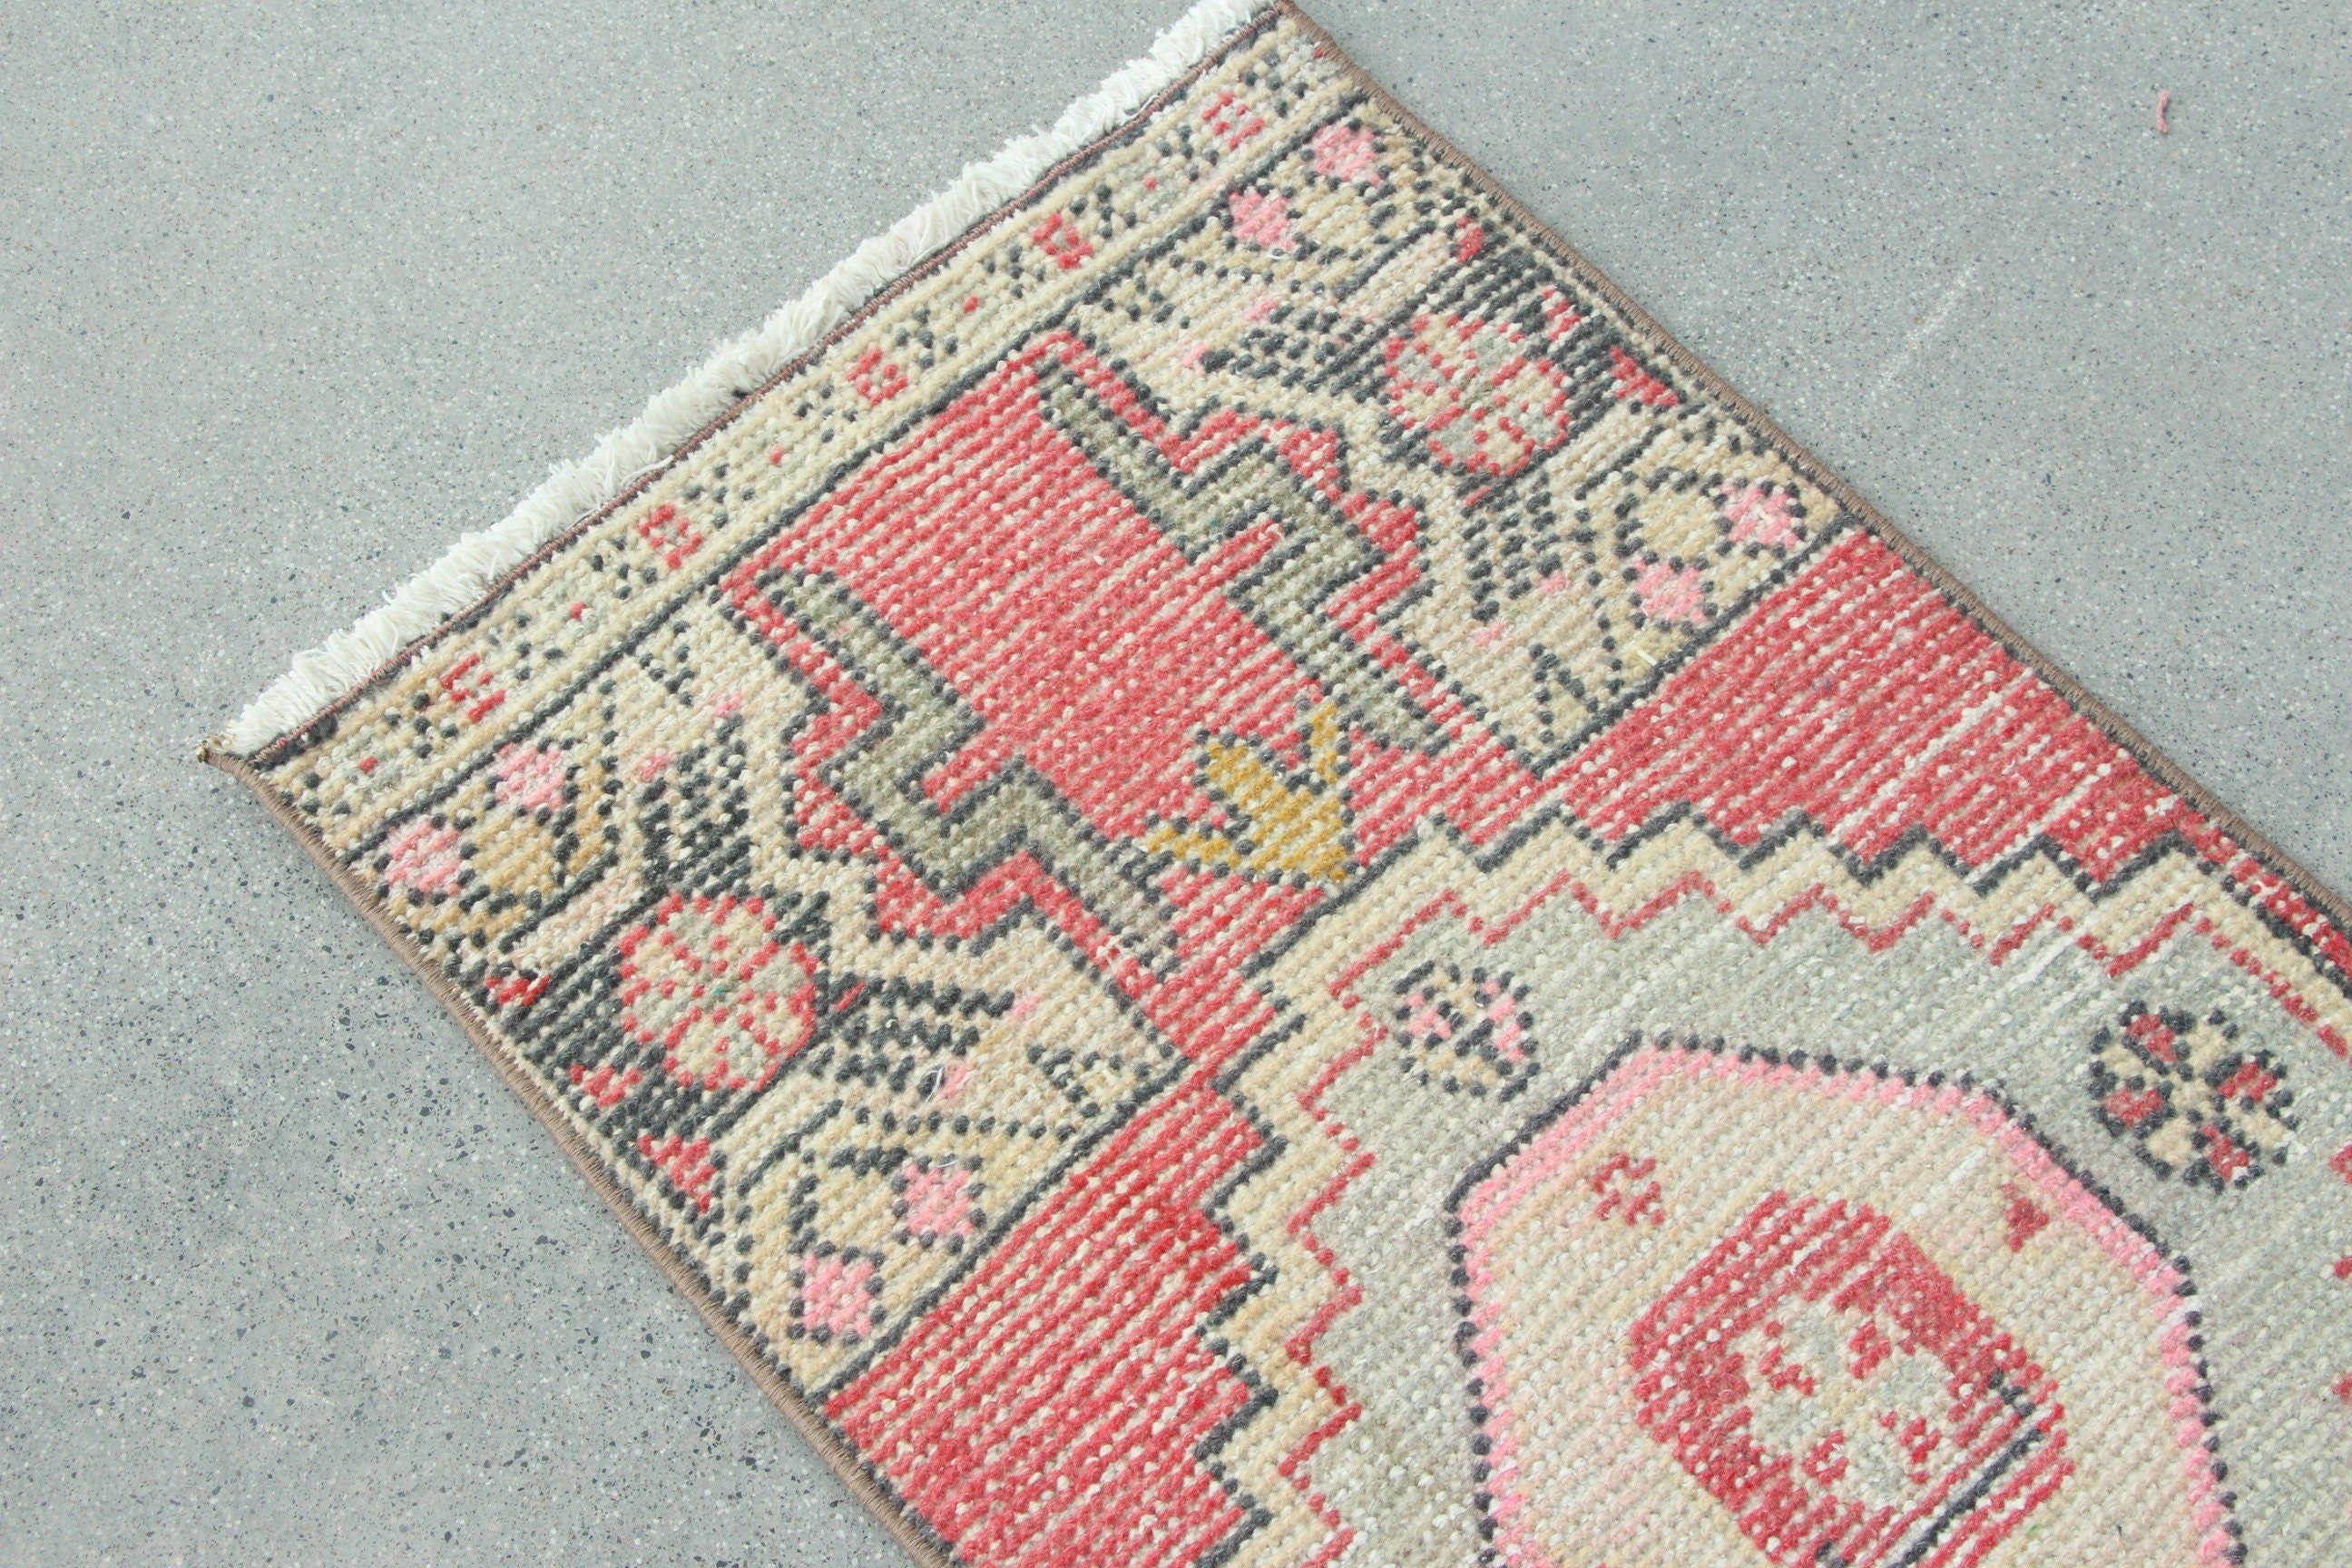 Vintage Rugs, Entry Rug, Cool Rugs, Art Rug, Turkish Rug, Red  1.5x3.1 ft Small Rugs, Oushak Rug, Car Mat Rug, Rugs for Bath